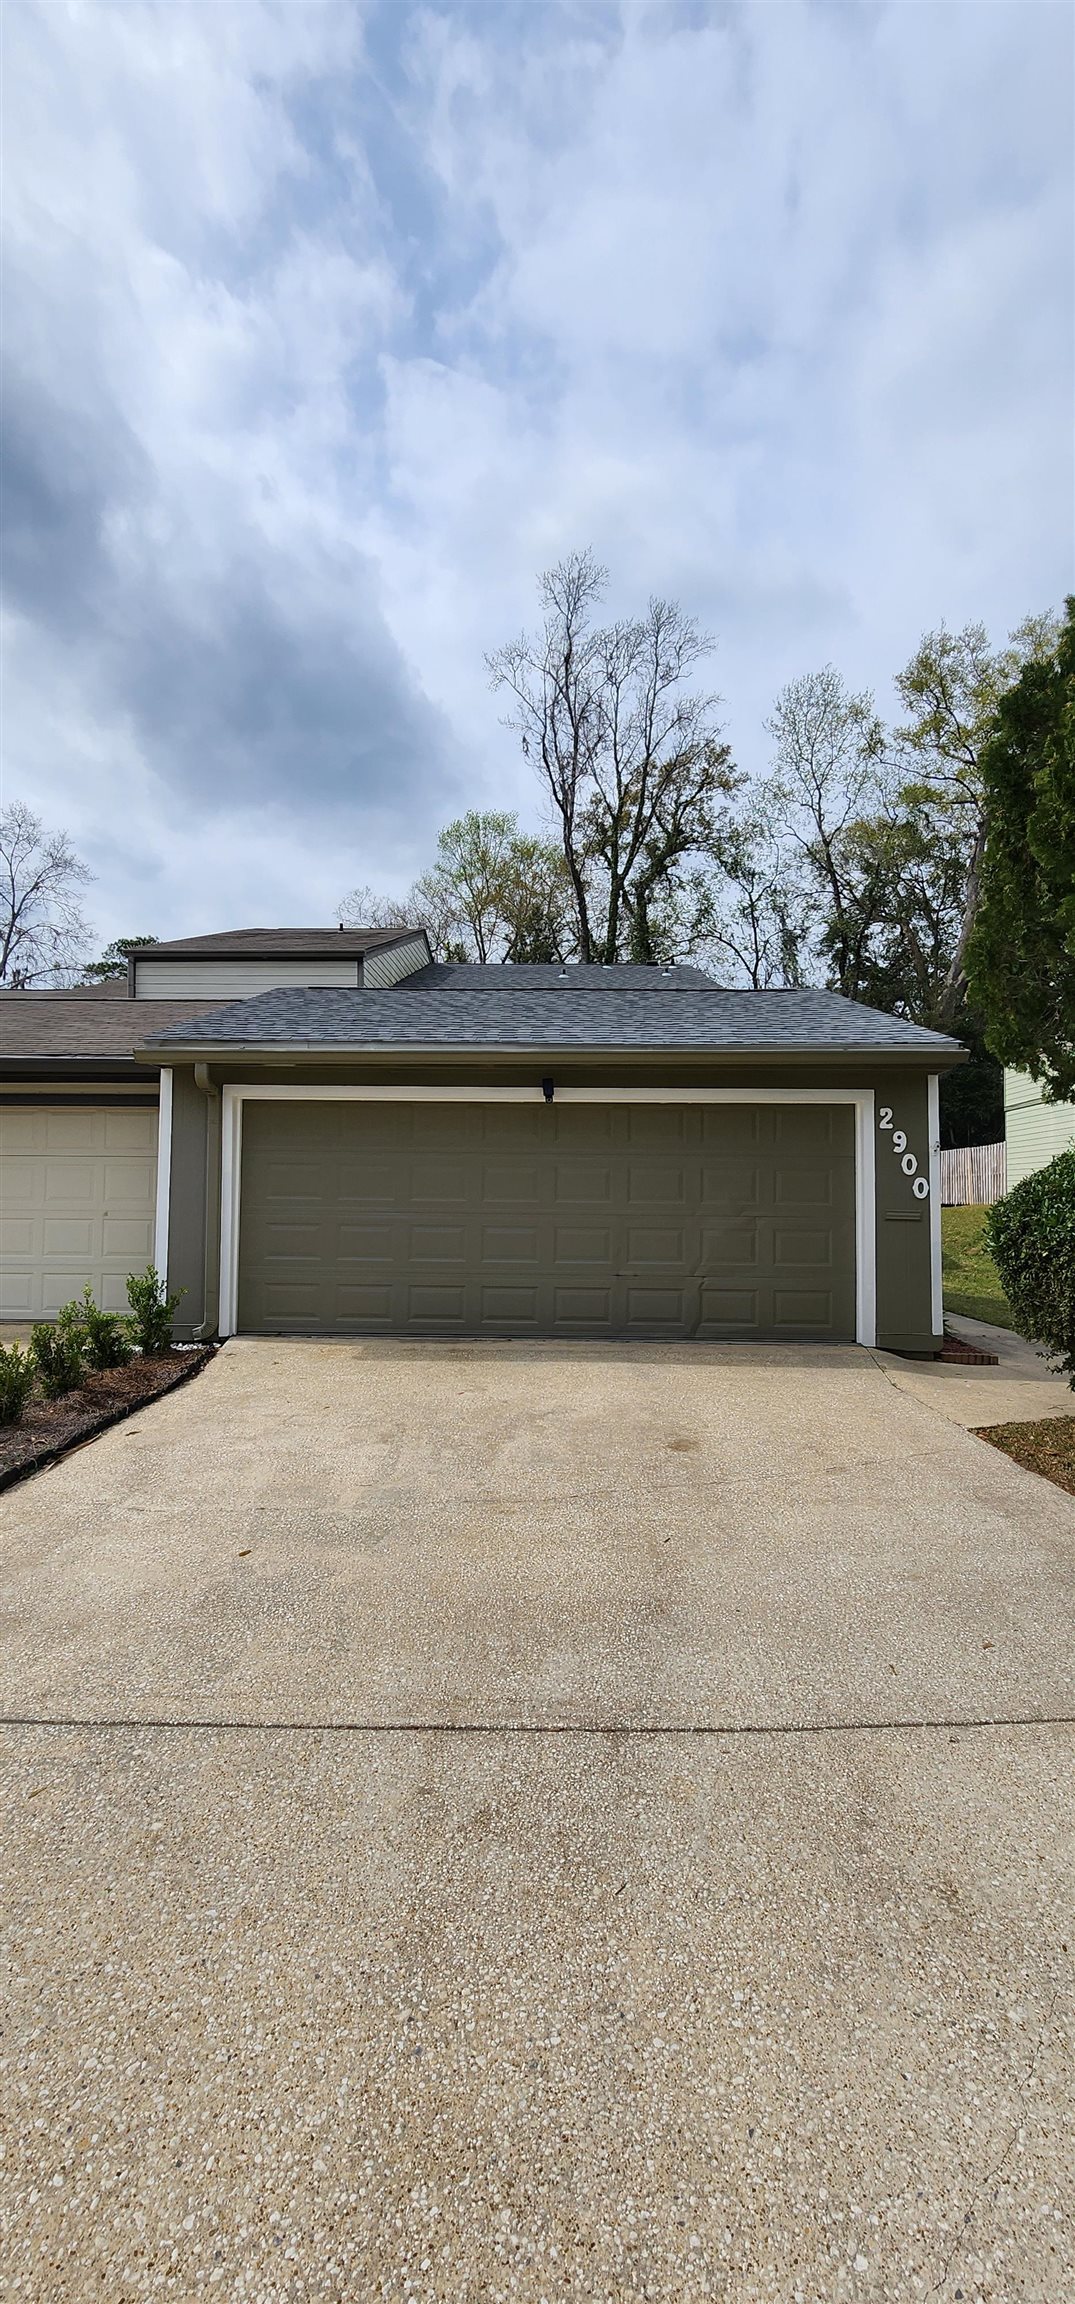 2900 Blair Stone Court,TALLAHASSEE,Florida 32301,2 Bedrooms Bedrooms,2 BathroomsBathrooms,Townhouse,2900 Blair Stone Court,369206